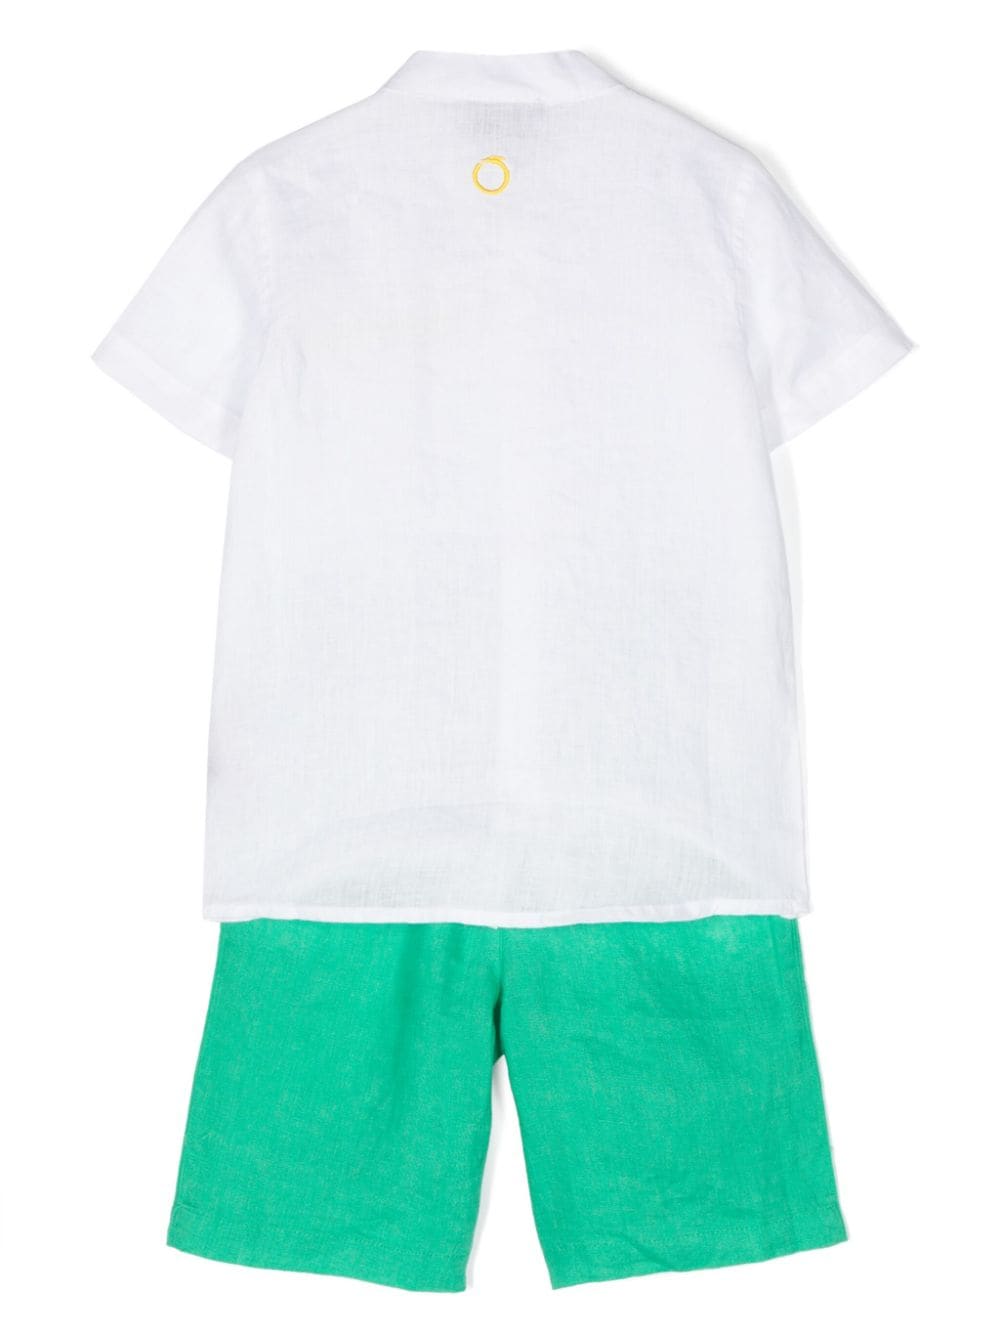 Elegant white and green suit for boys with logo